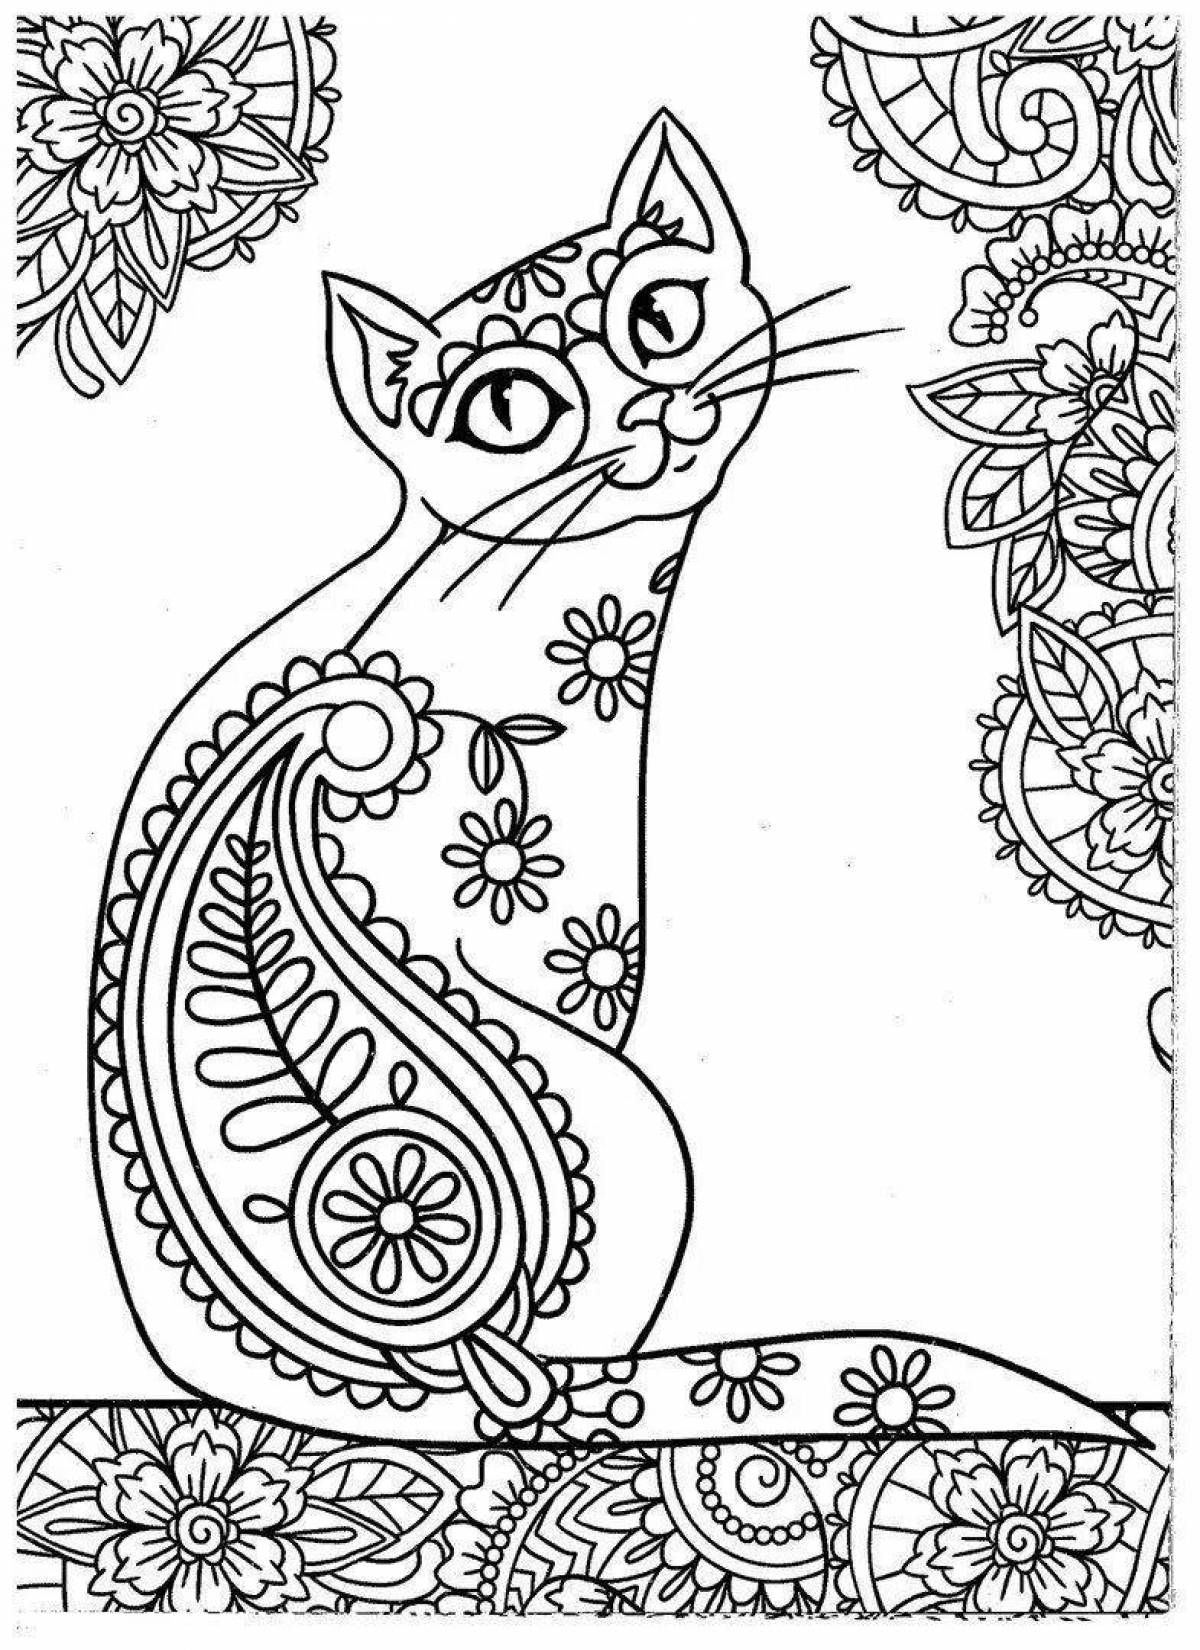 Awesome magical cats coloring page